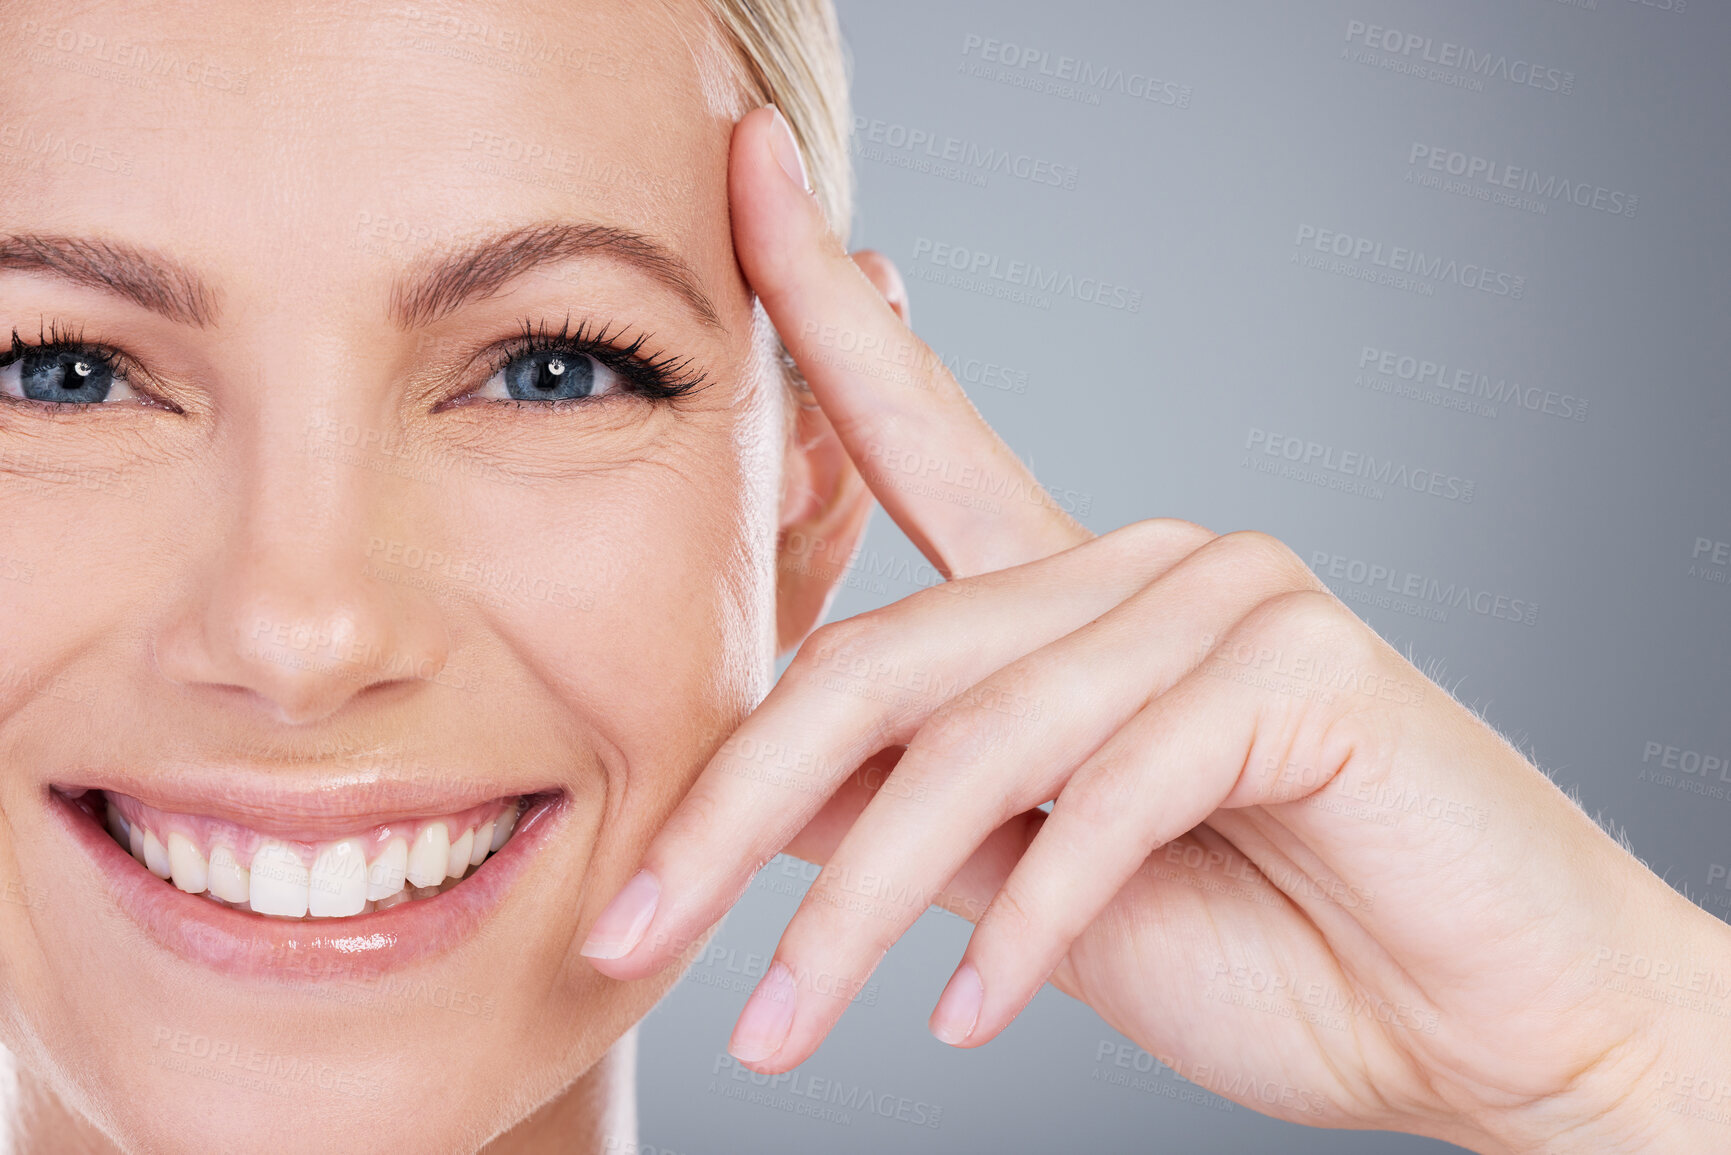 Buy stock photo Studio portrait of an attractive mature woman touching her face against a grey background